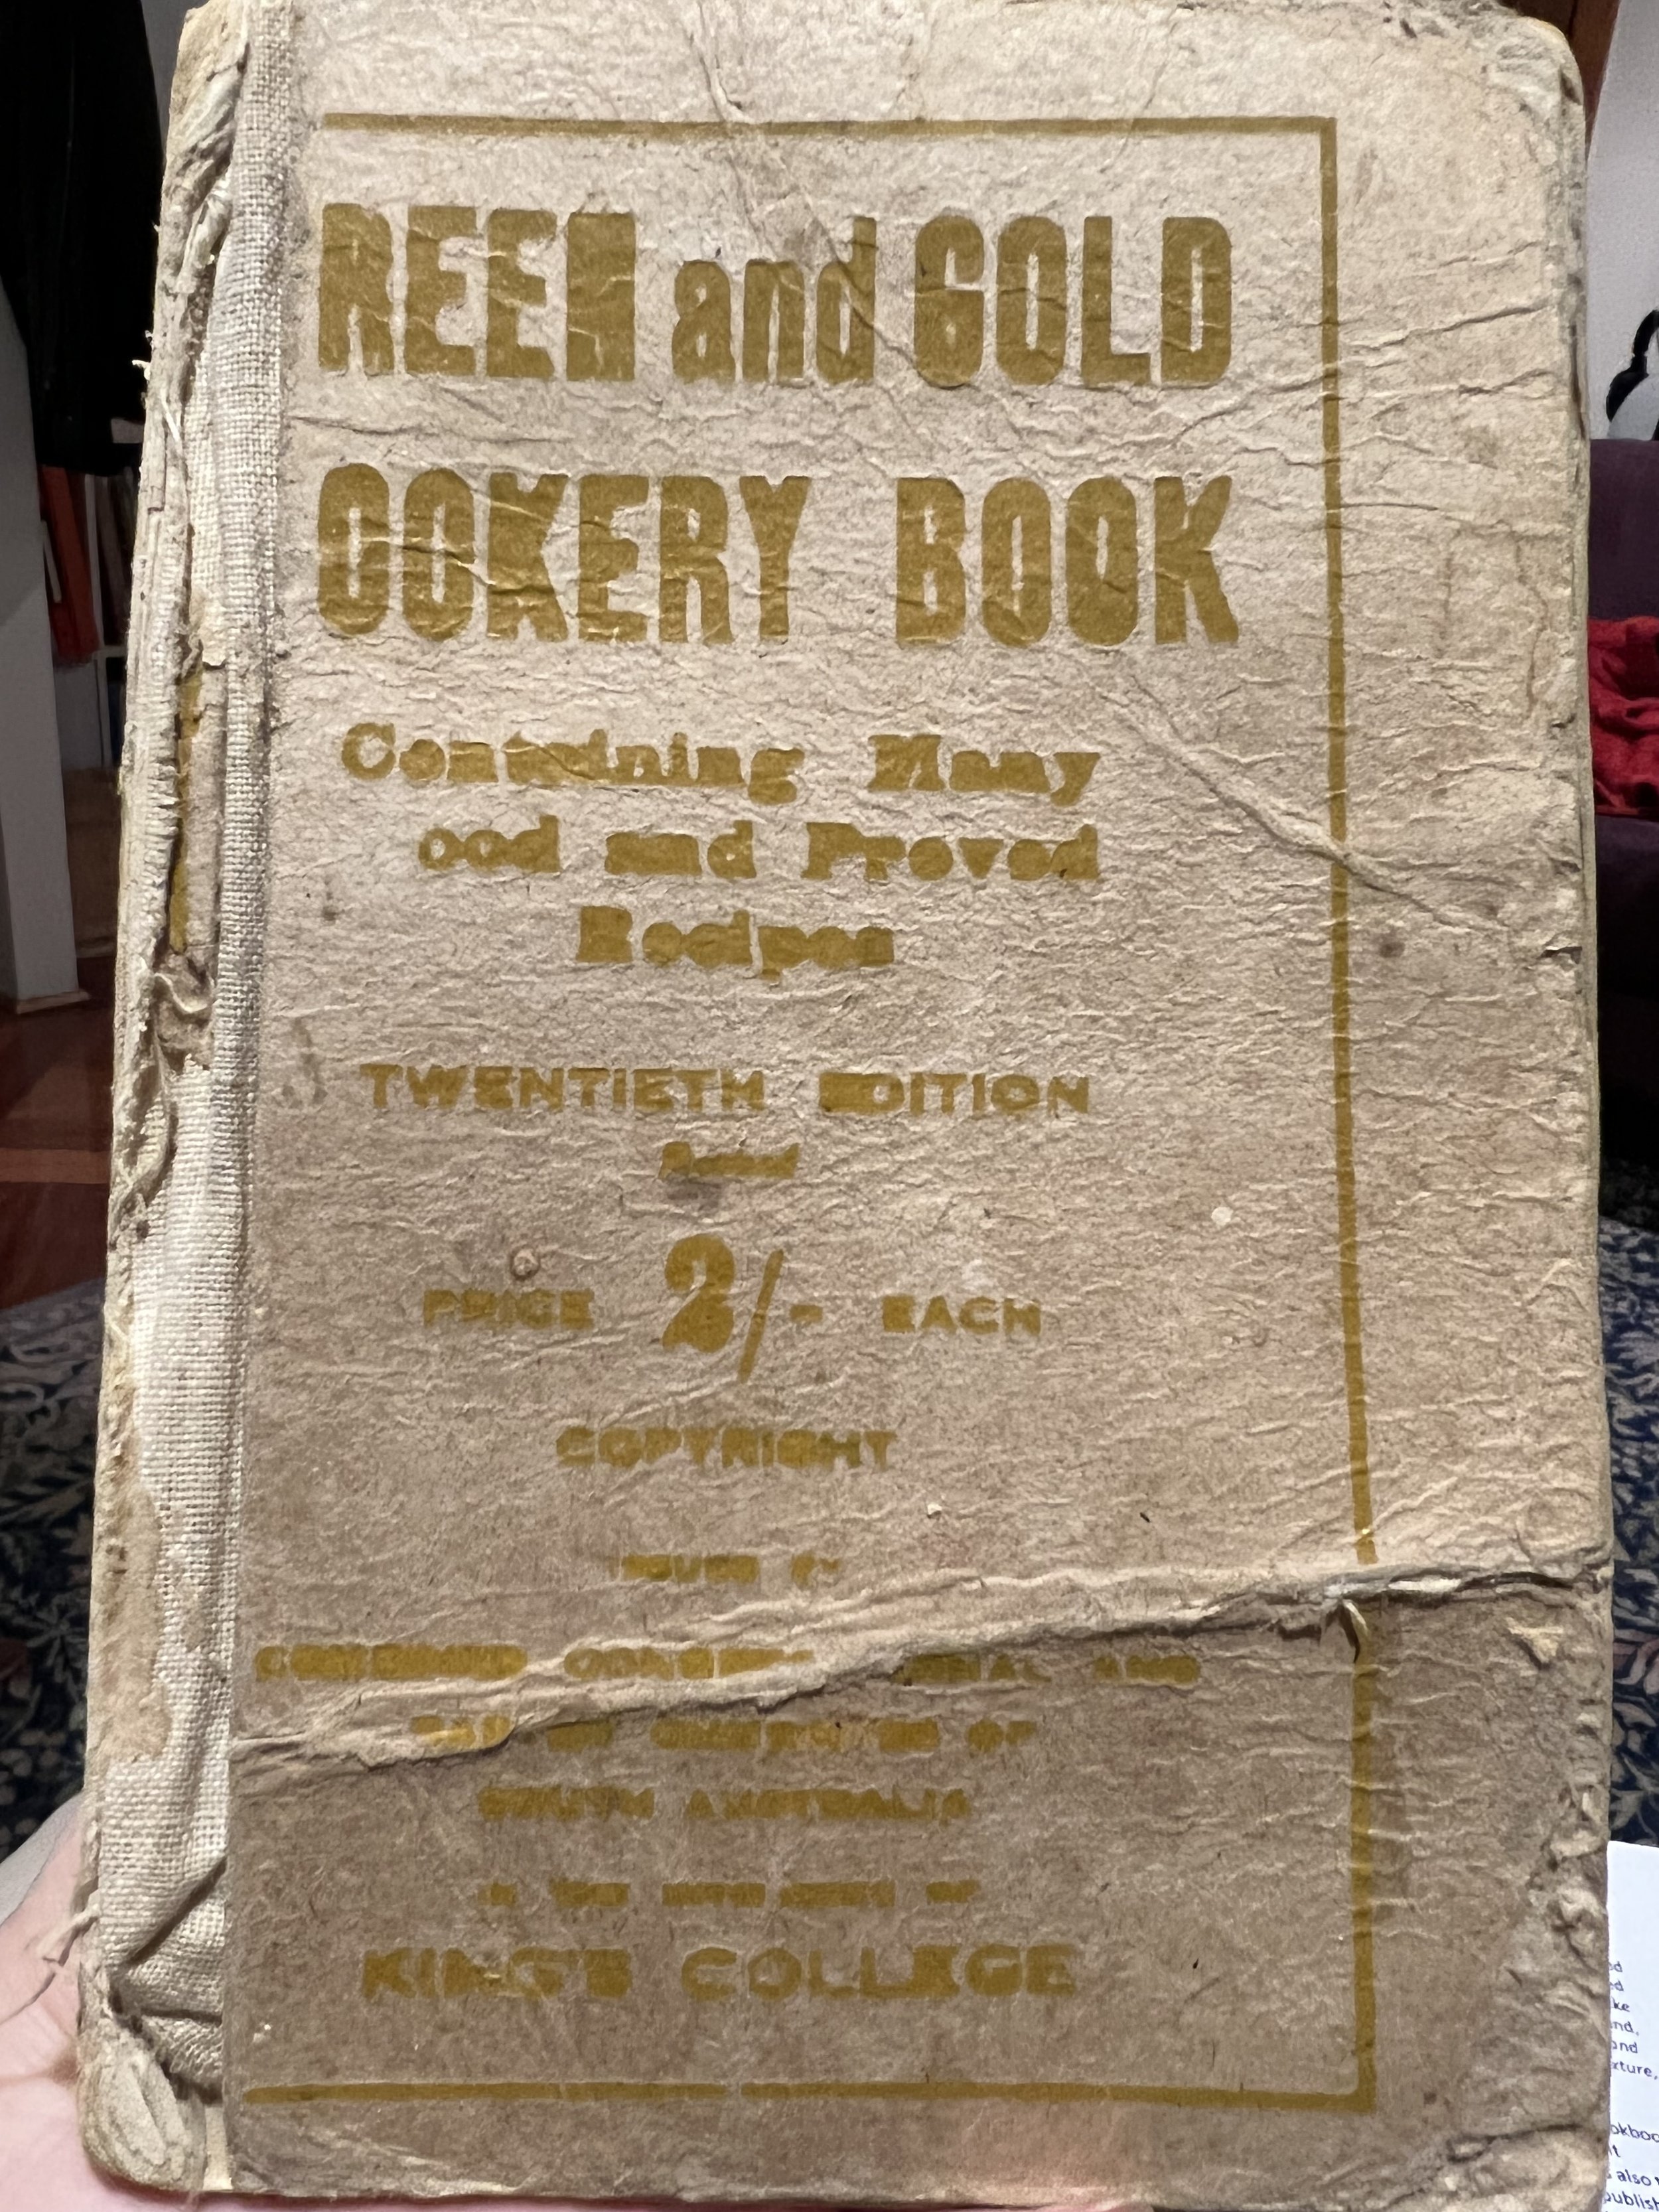 Green and Gold Cookery Book jacket.